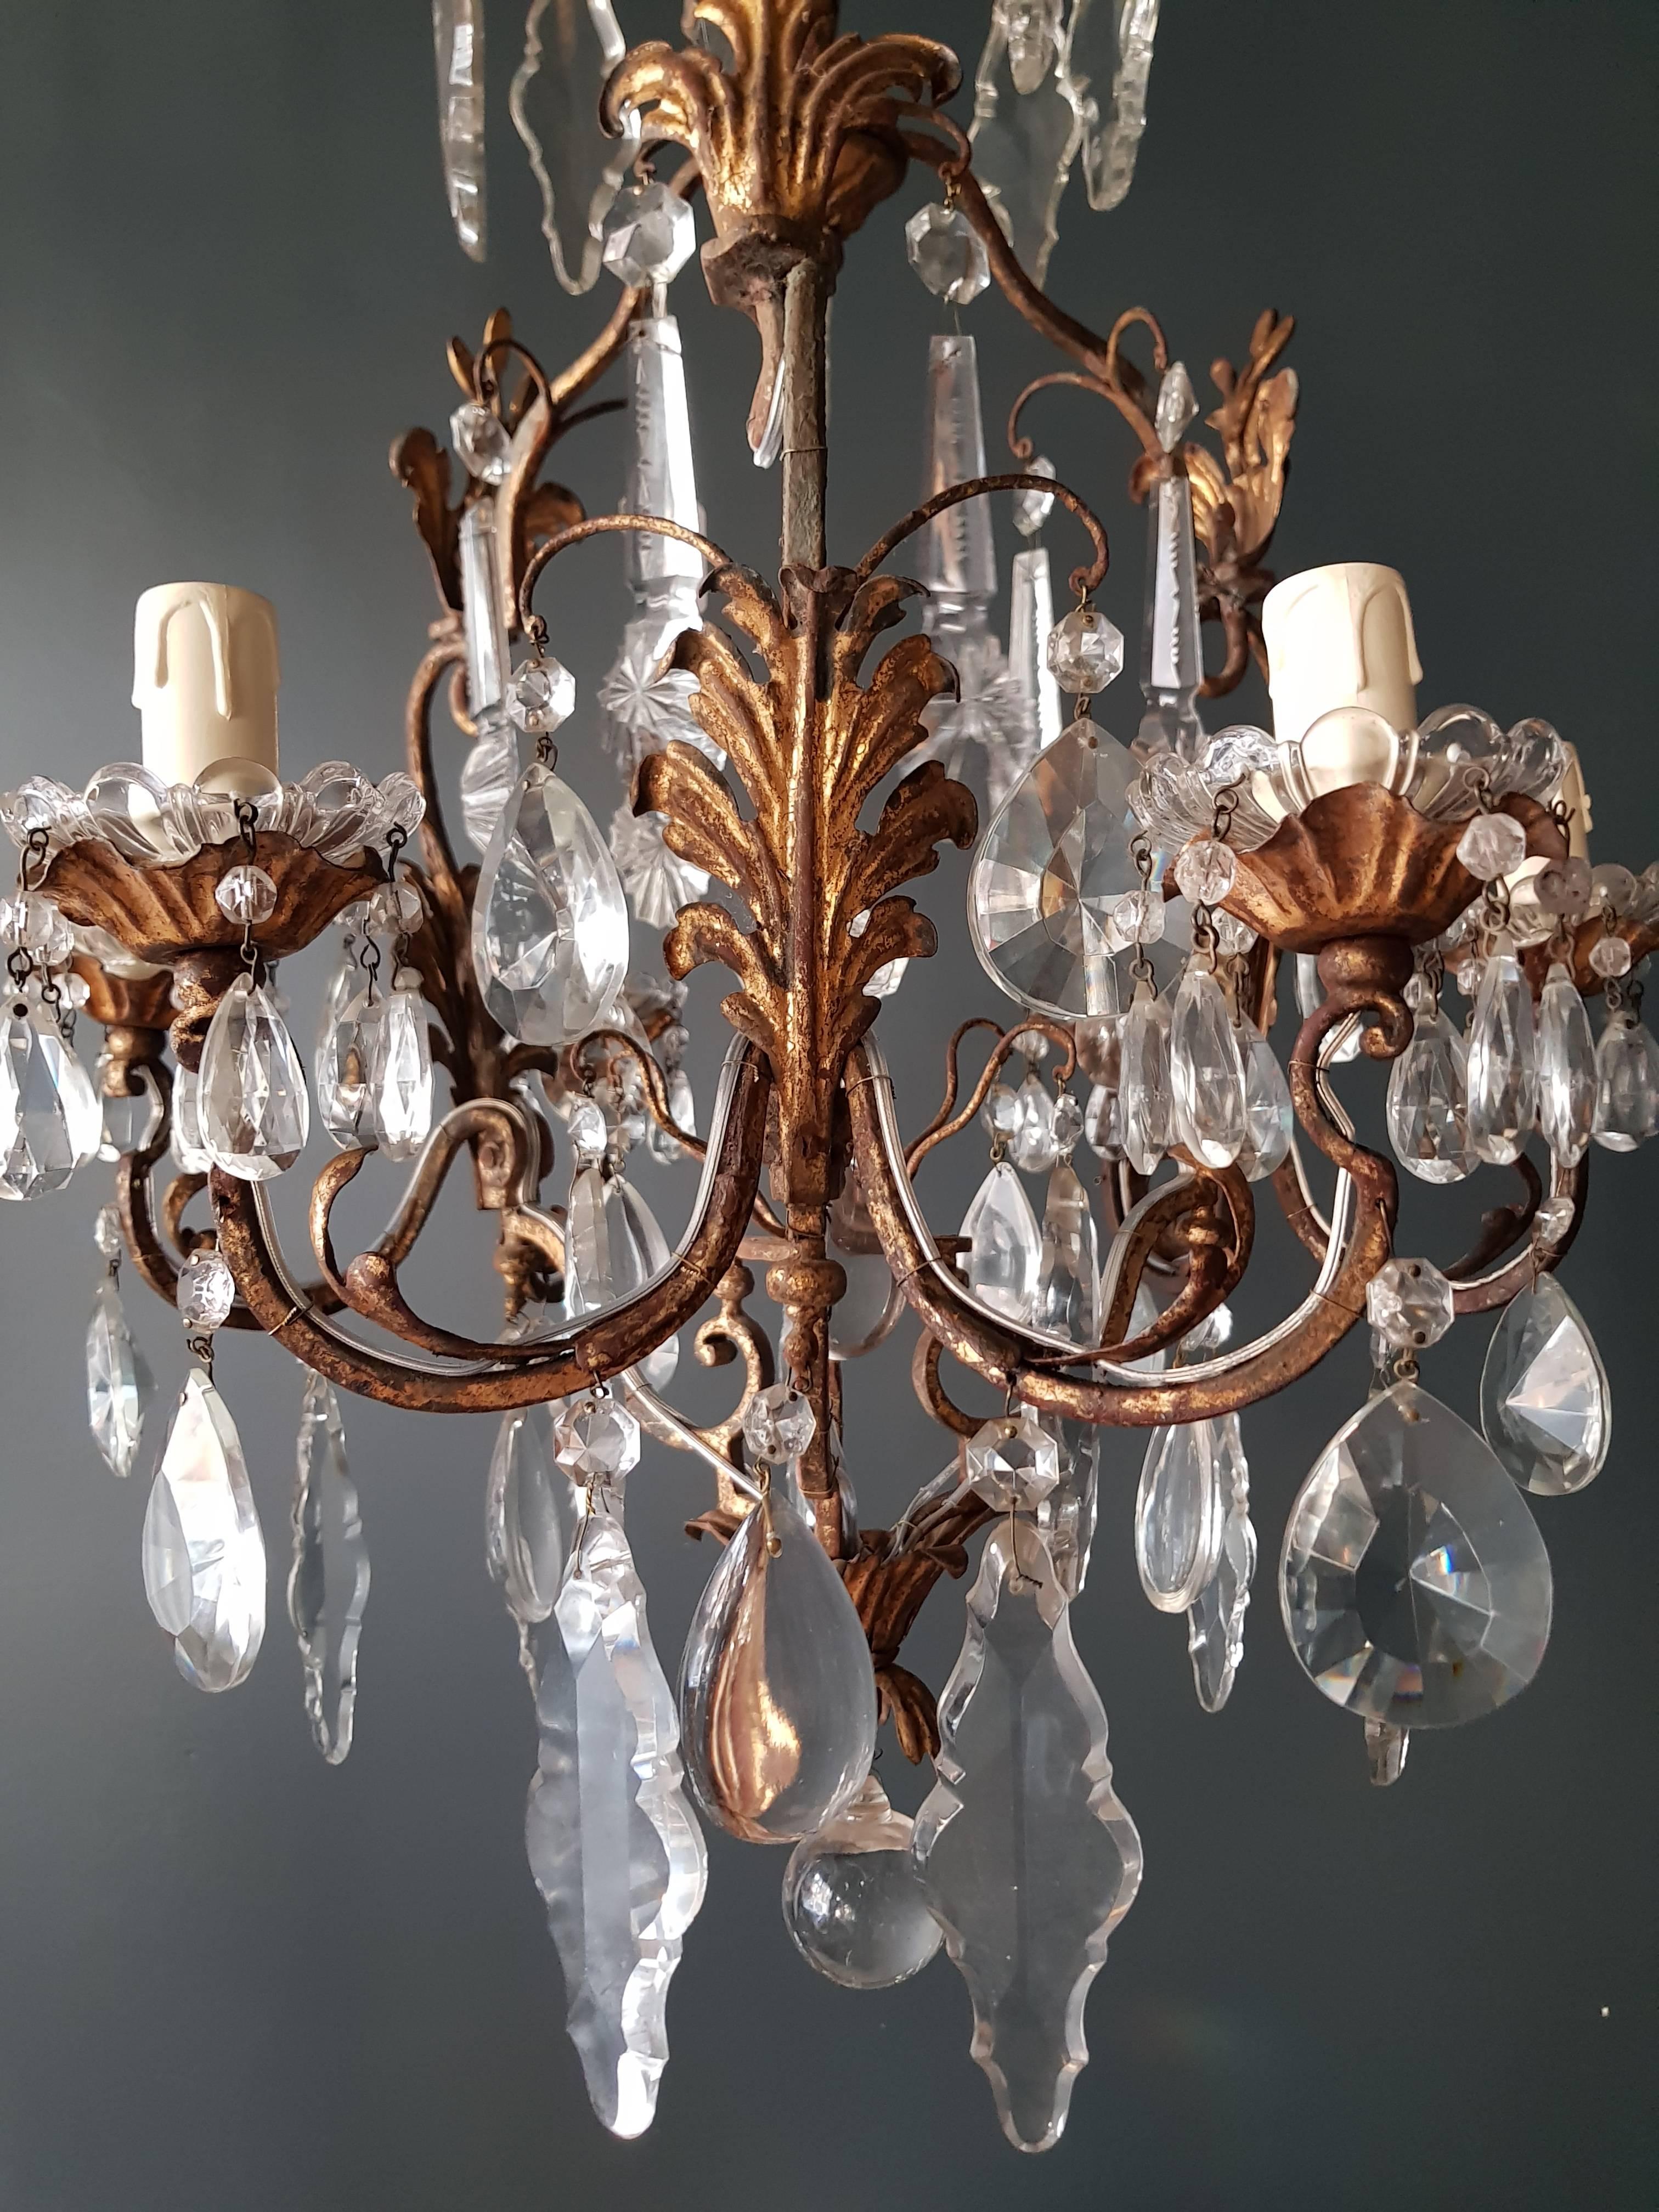 Antique Crystal Chandelier - Restored Elegance with Art Nouveau Charm

Explore the allure of a timeless treasure with this antique crystal chandelier, a masterpiece that encapsulates the essence of Art Nouveau elegance. Lovingly restored in Berlin,